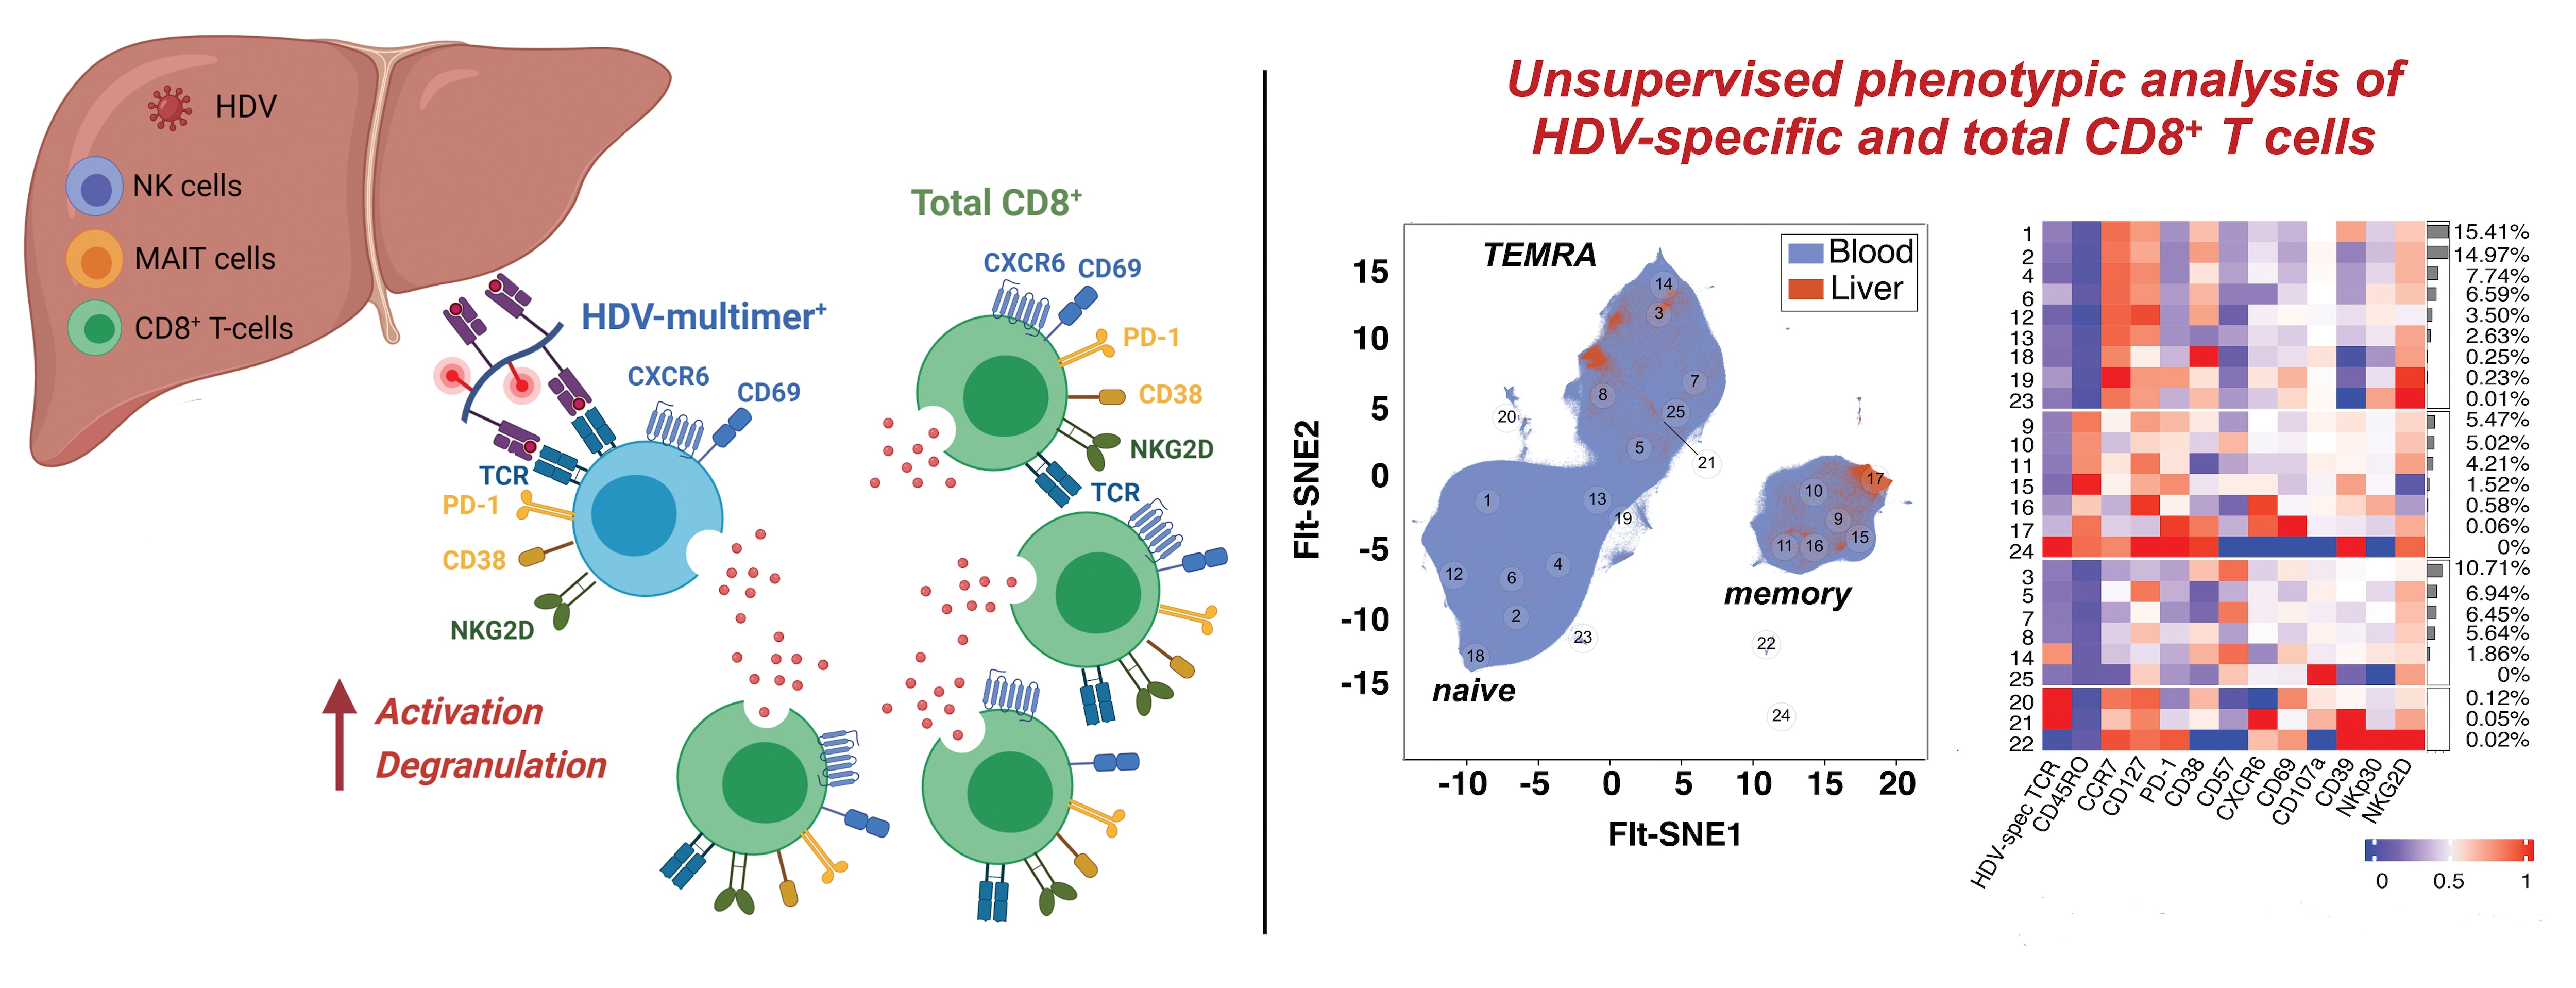 Diagram of unsupervised phenotypic analysis of HDV-specific and total CD8+ T cells.